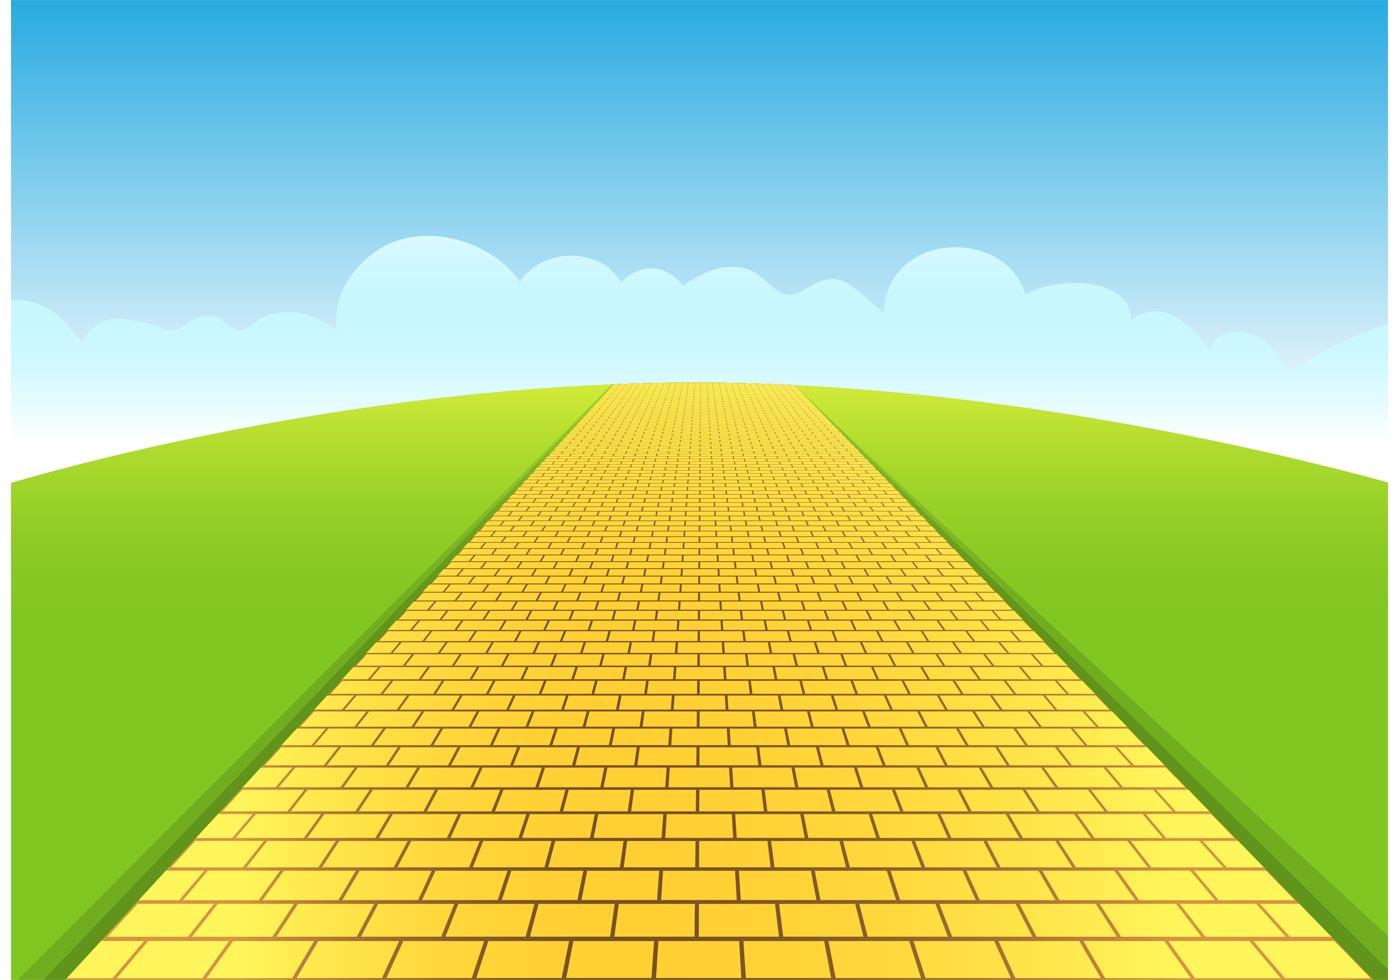 cartoon image of a yellow brick road stretching into the distance, with green grass on either side.